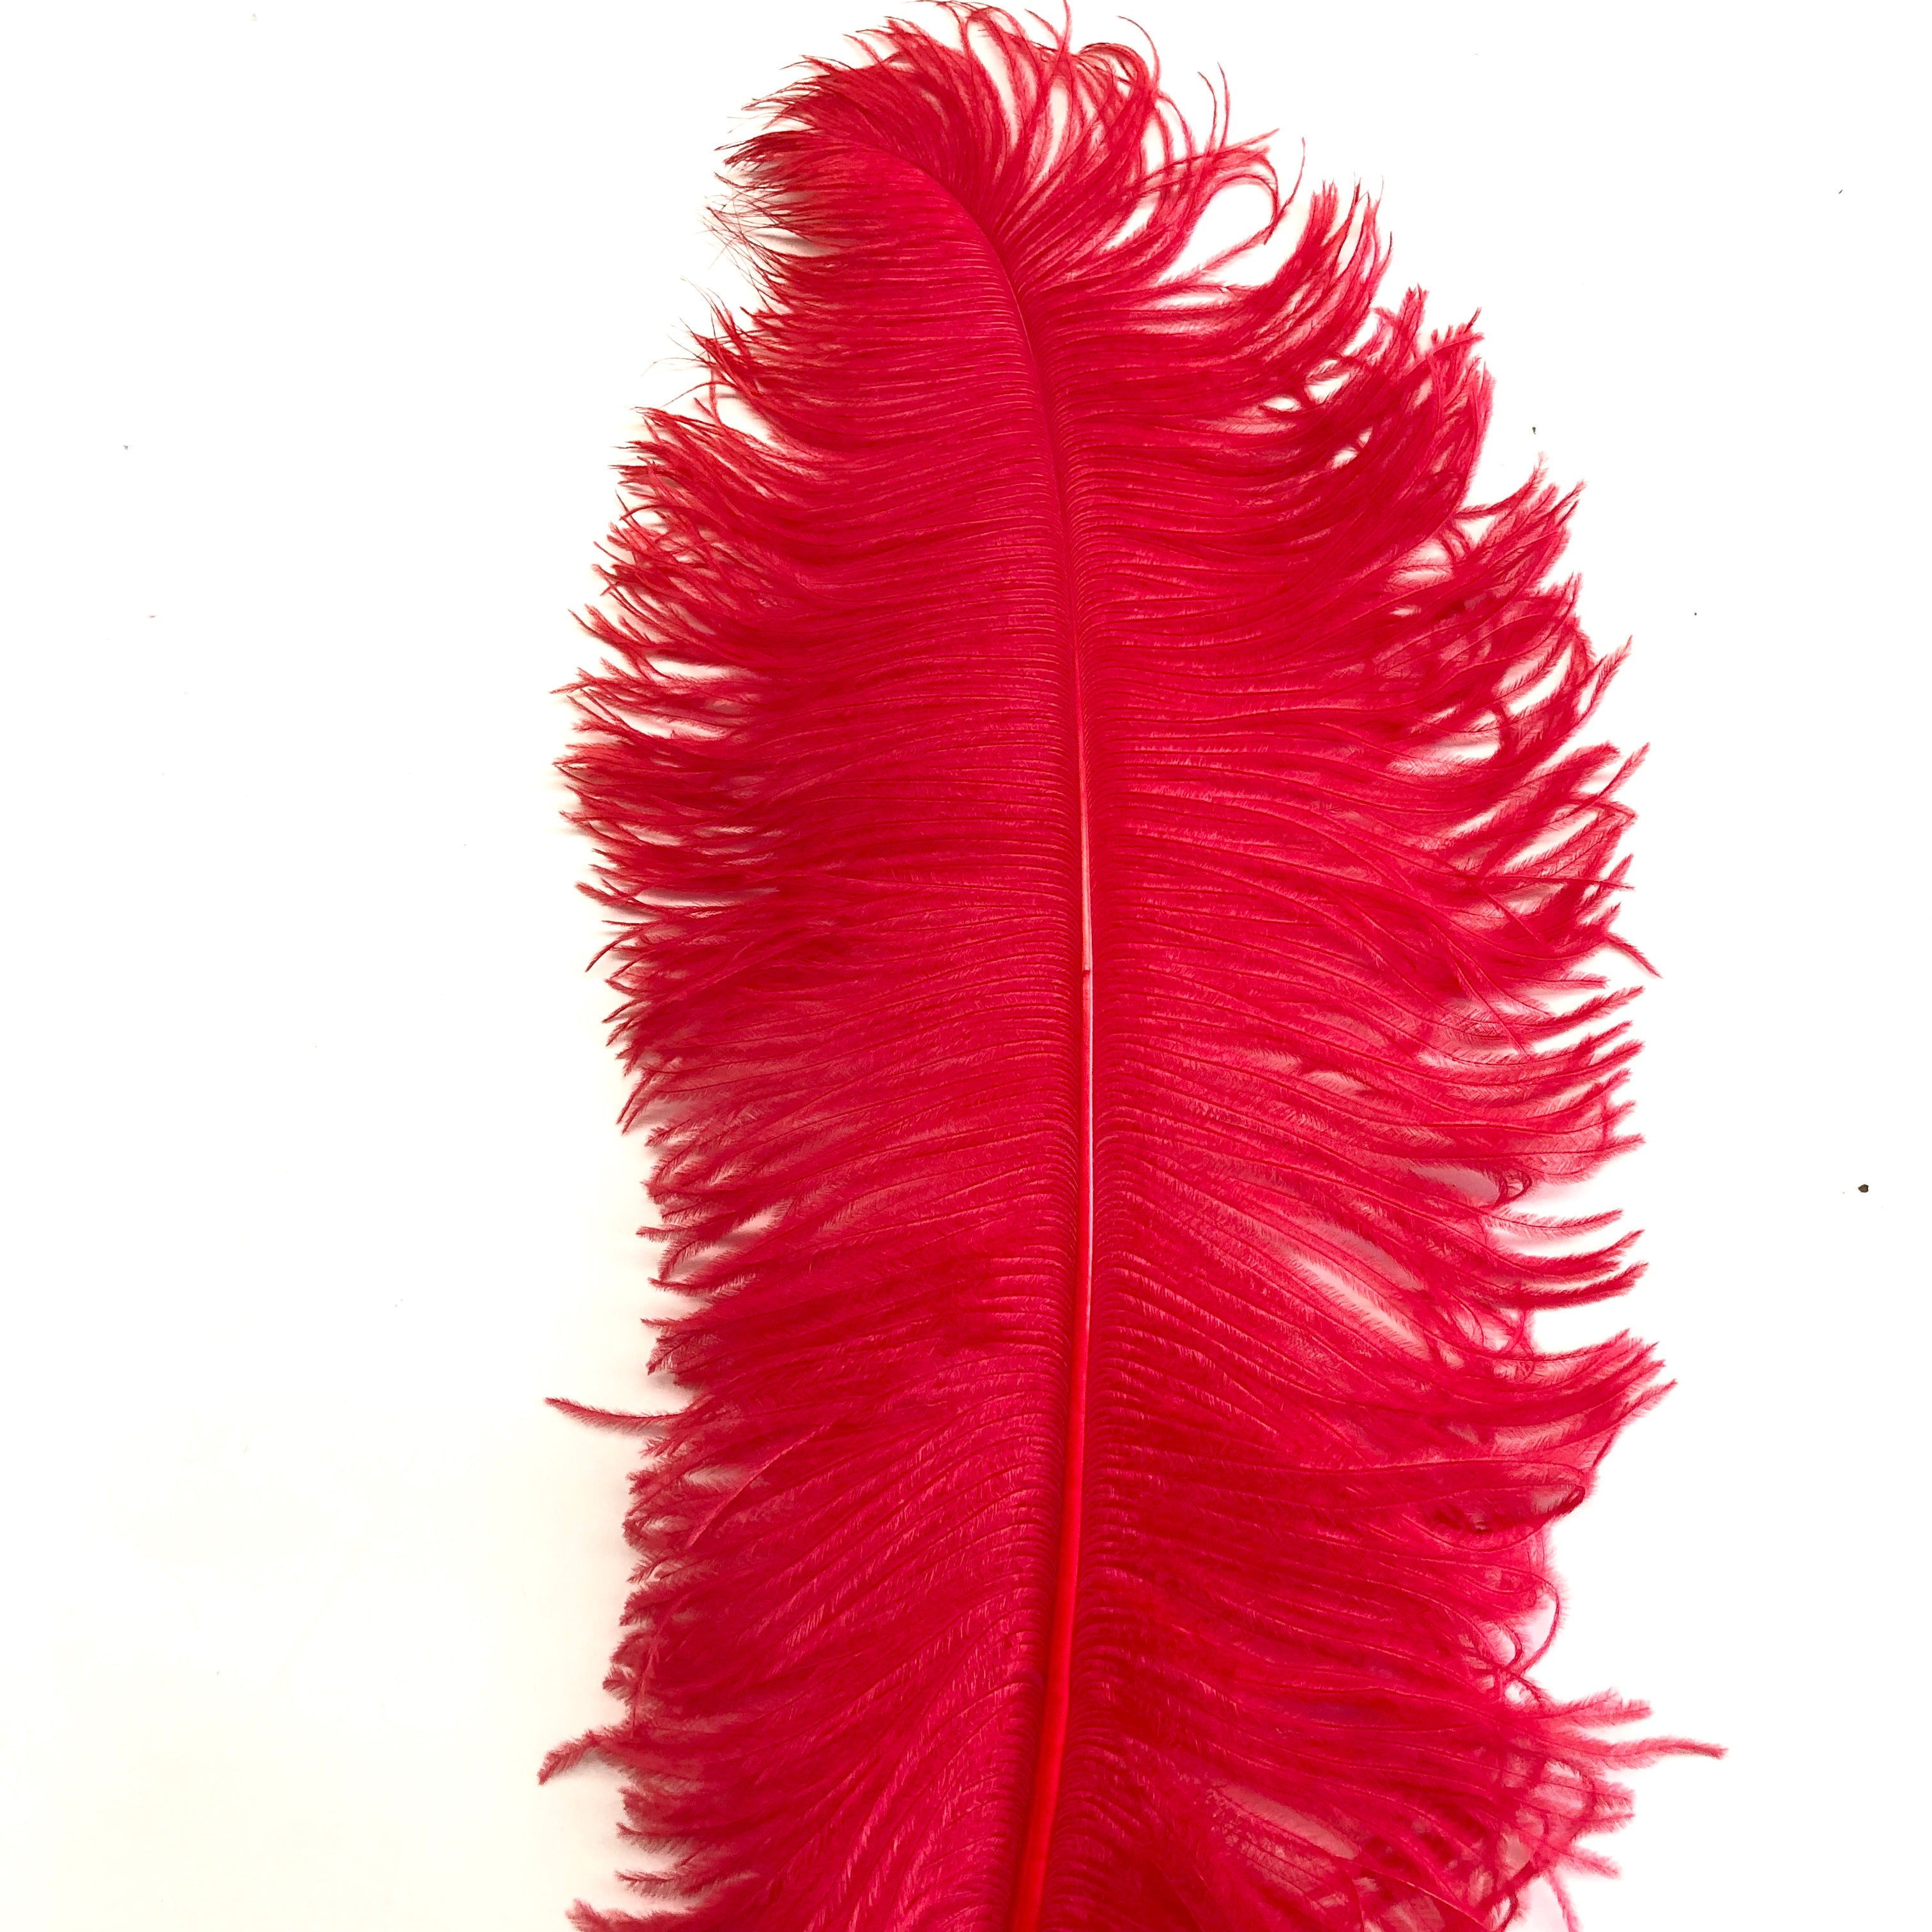 Ostrich Wing Feather Plumes 60-65cm (24-26") - Red